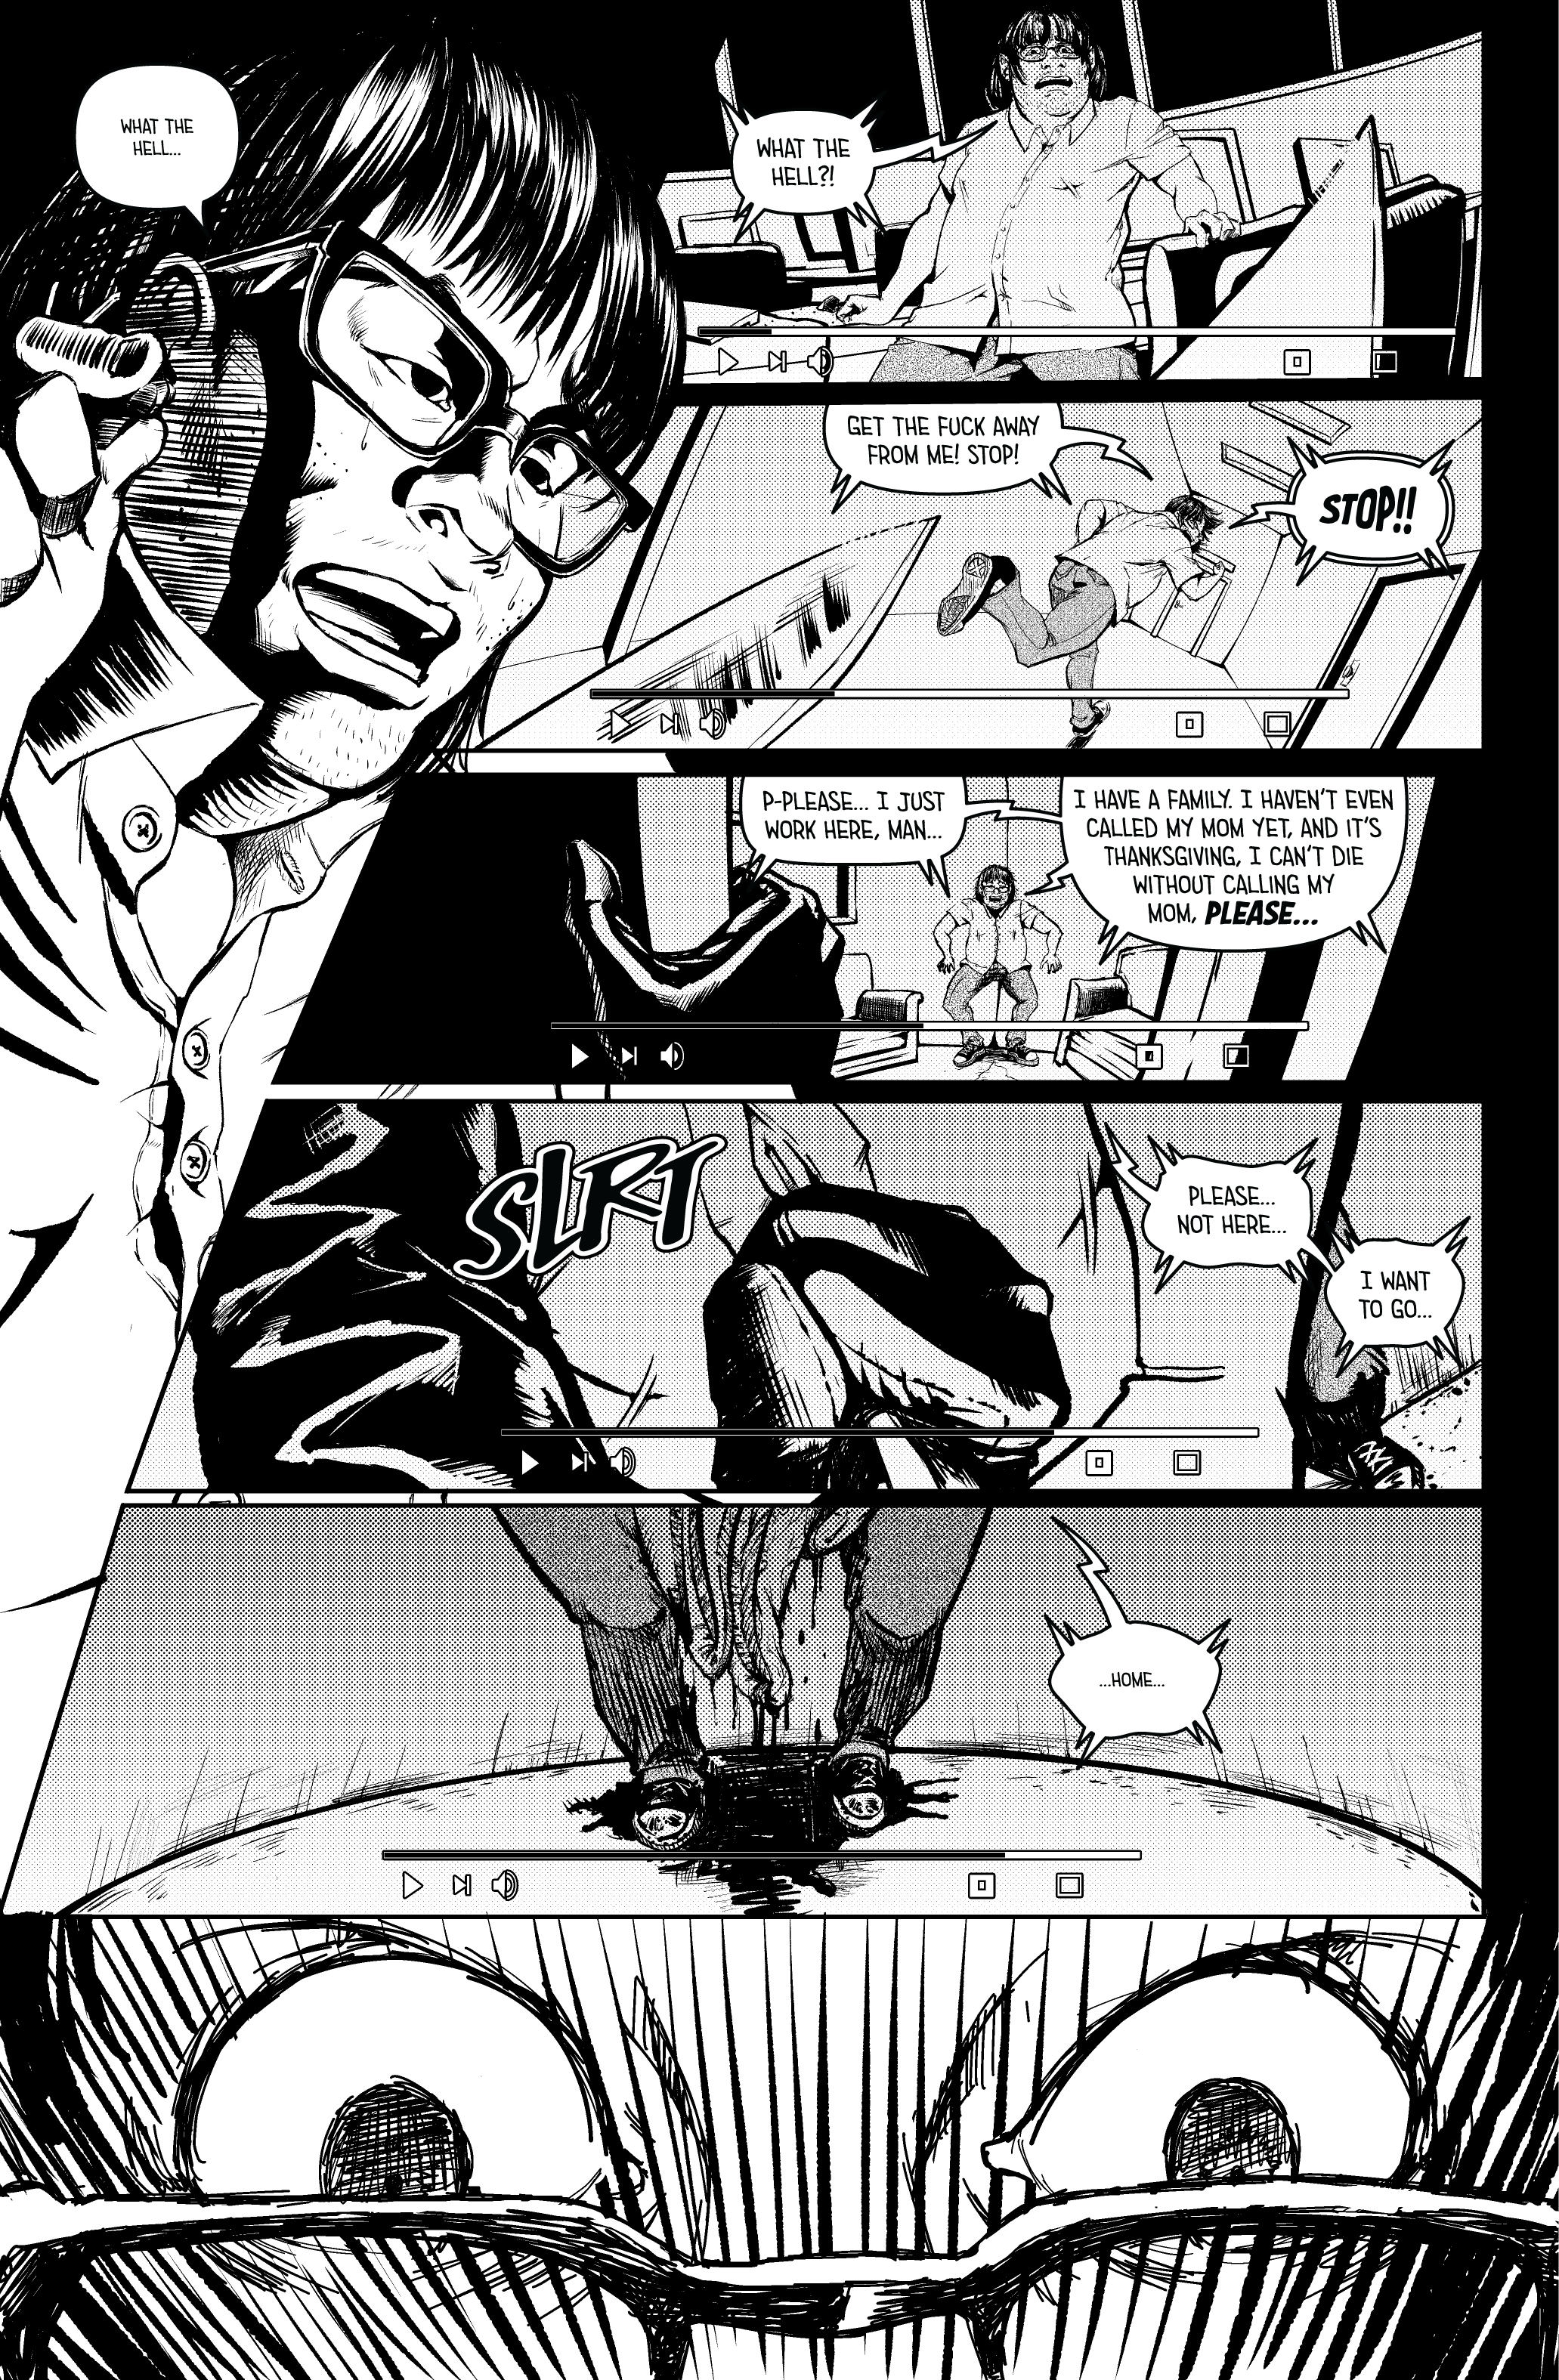 Monocul issue 05 story 03 pg 05 - Content Warning-01.png